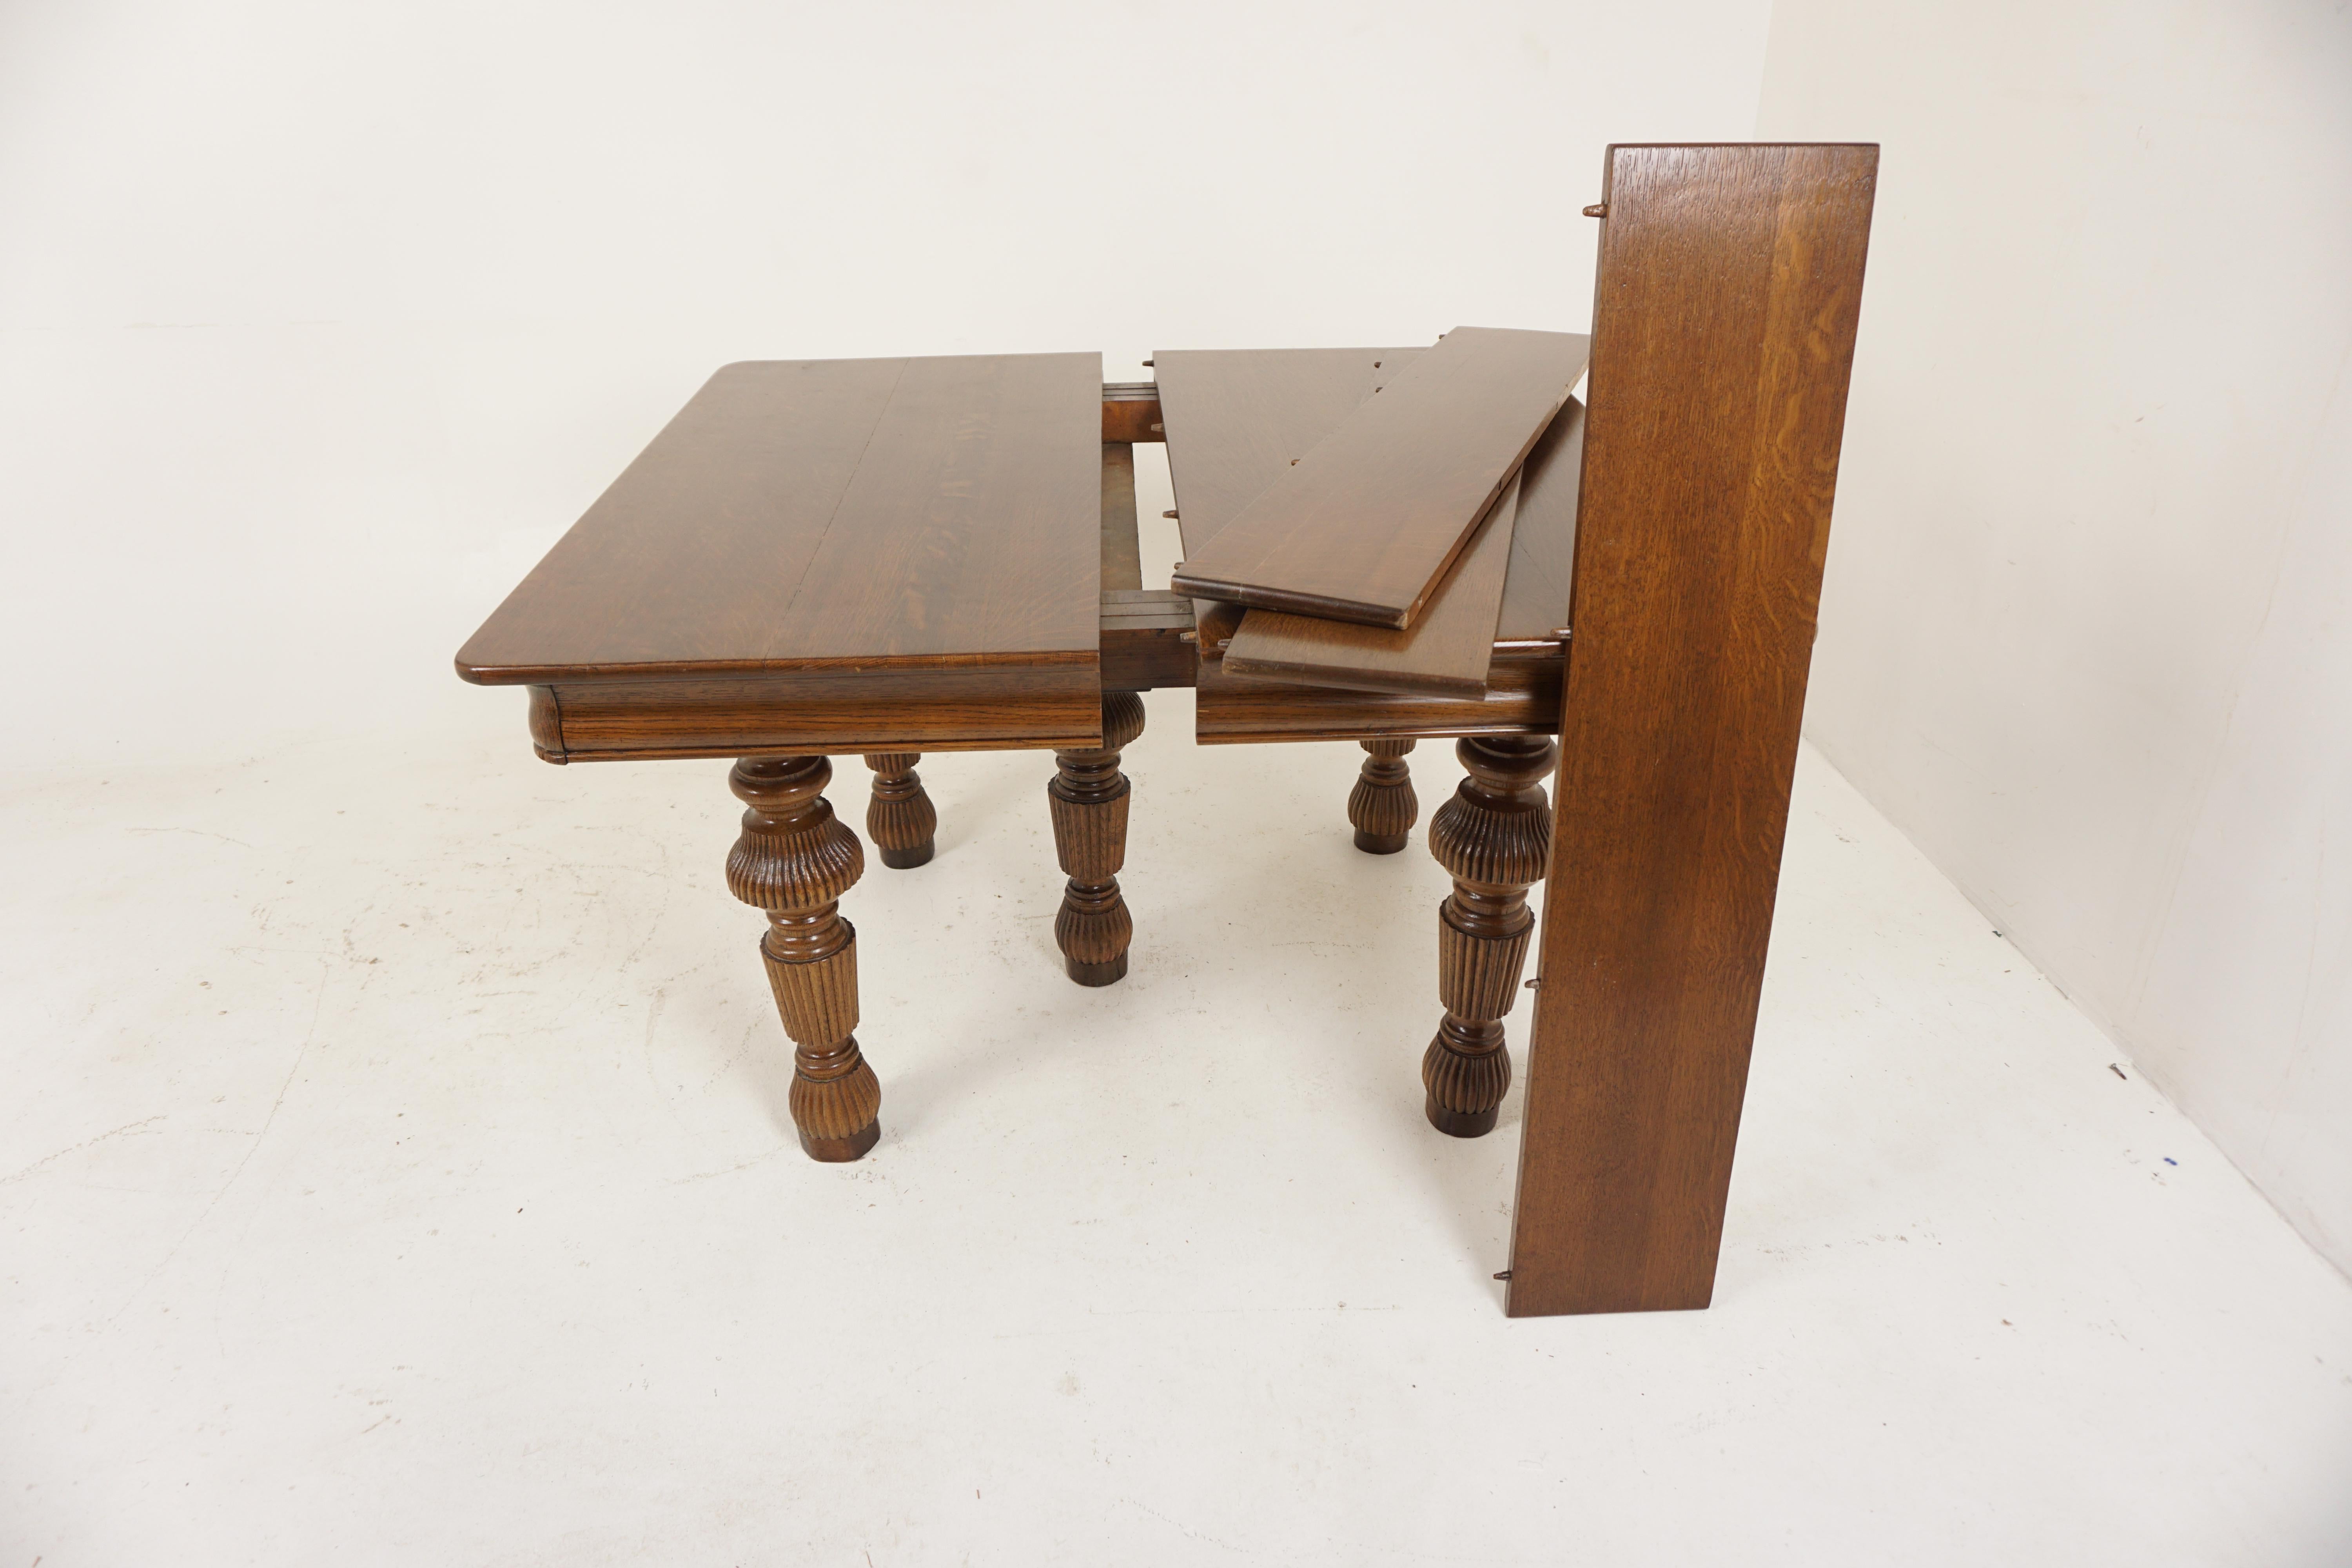 Antique Tiger Oak Dining Table, 3 Leaves, 5 Legs, American 1910, H691 In Good Condition For Sale In Vancouver, BC